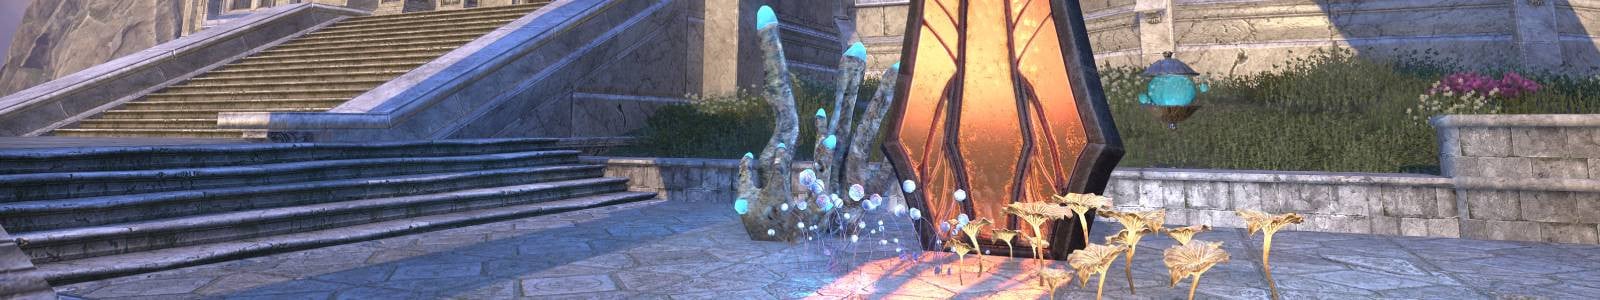 Mushrooms, Aether Cup Ring - ESO header